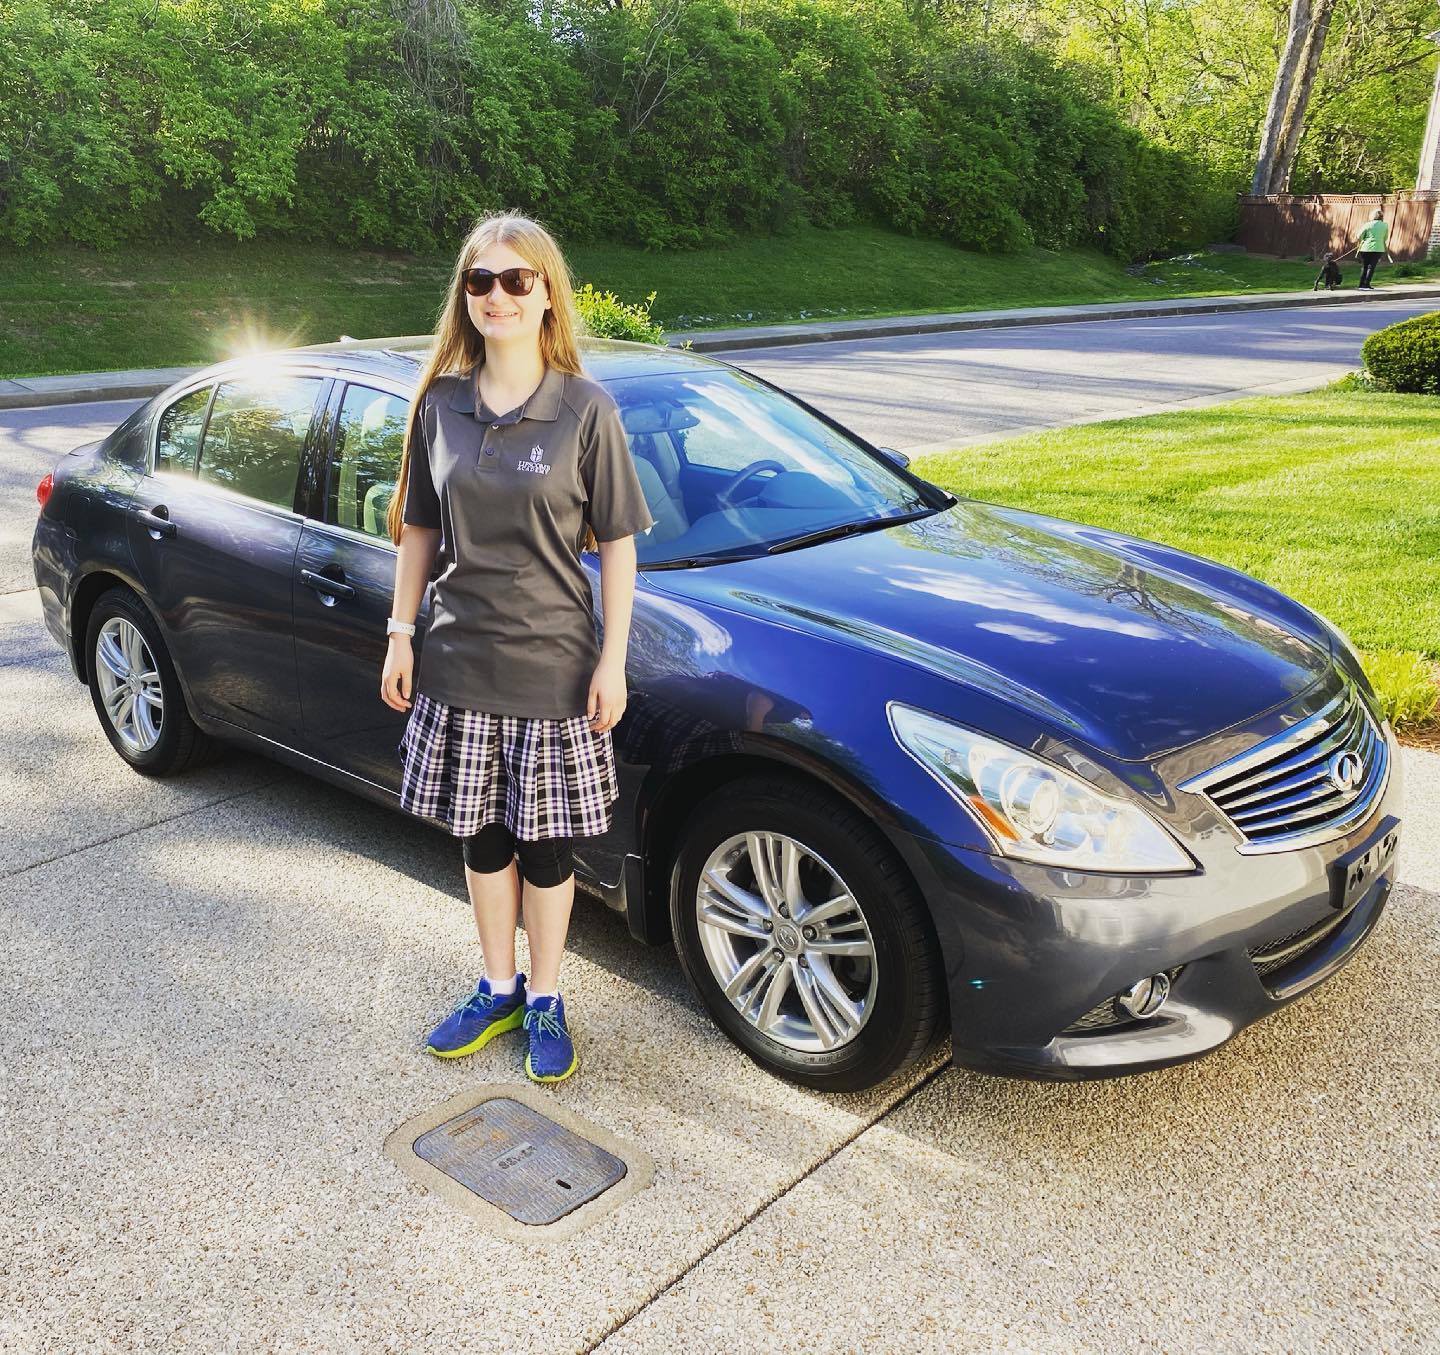 Congrats to Kate (@kateagee) on passing her driving test this past Saturday. To celebrate we got her hand-me-down car detailed yesterday. The detailer worked on it from 11:30am until almost 9pm and it looks great. #family